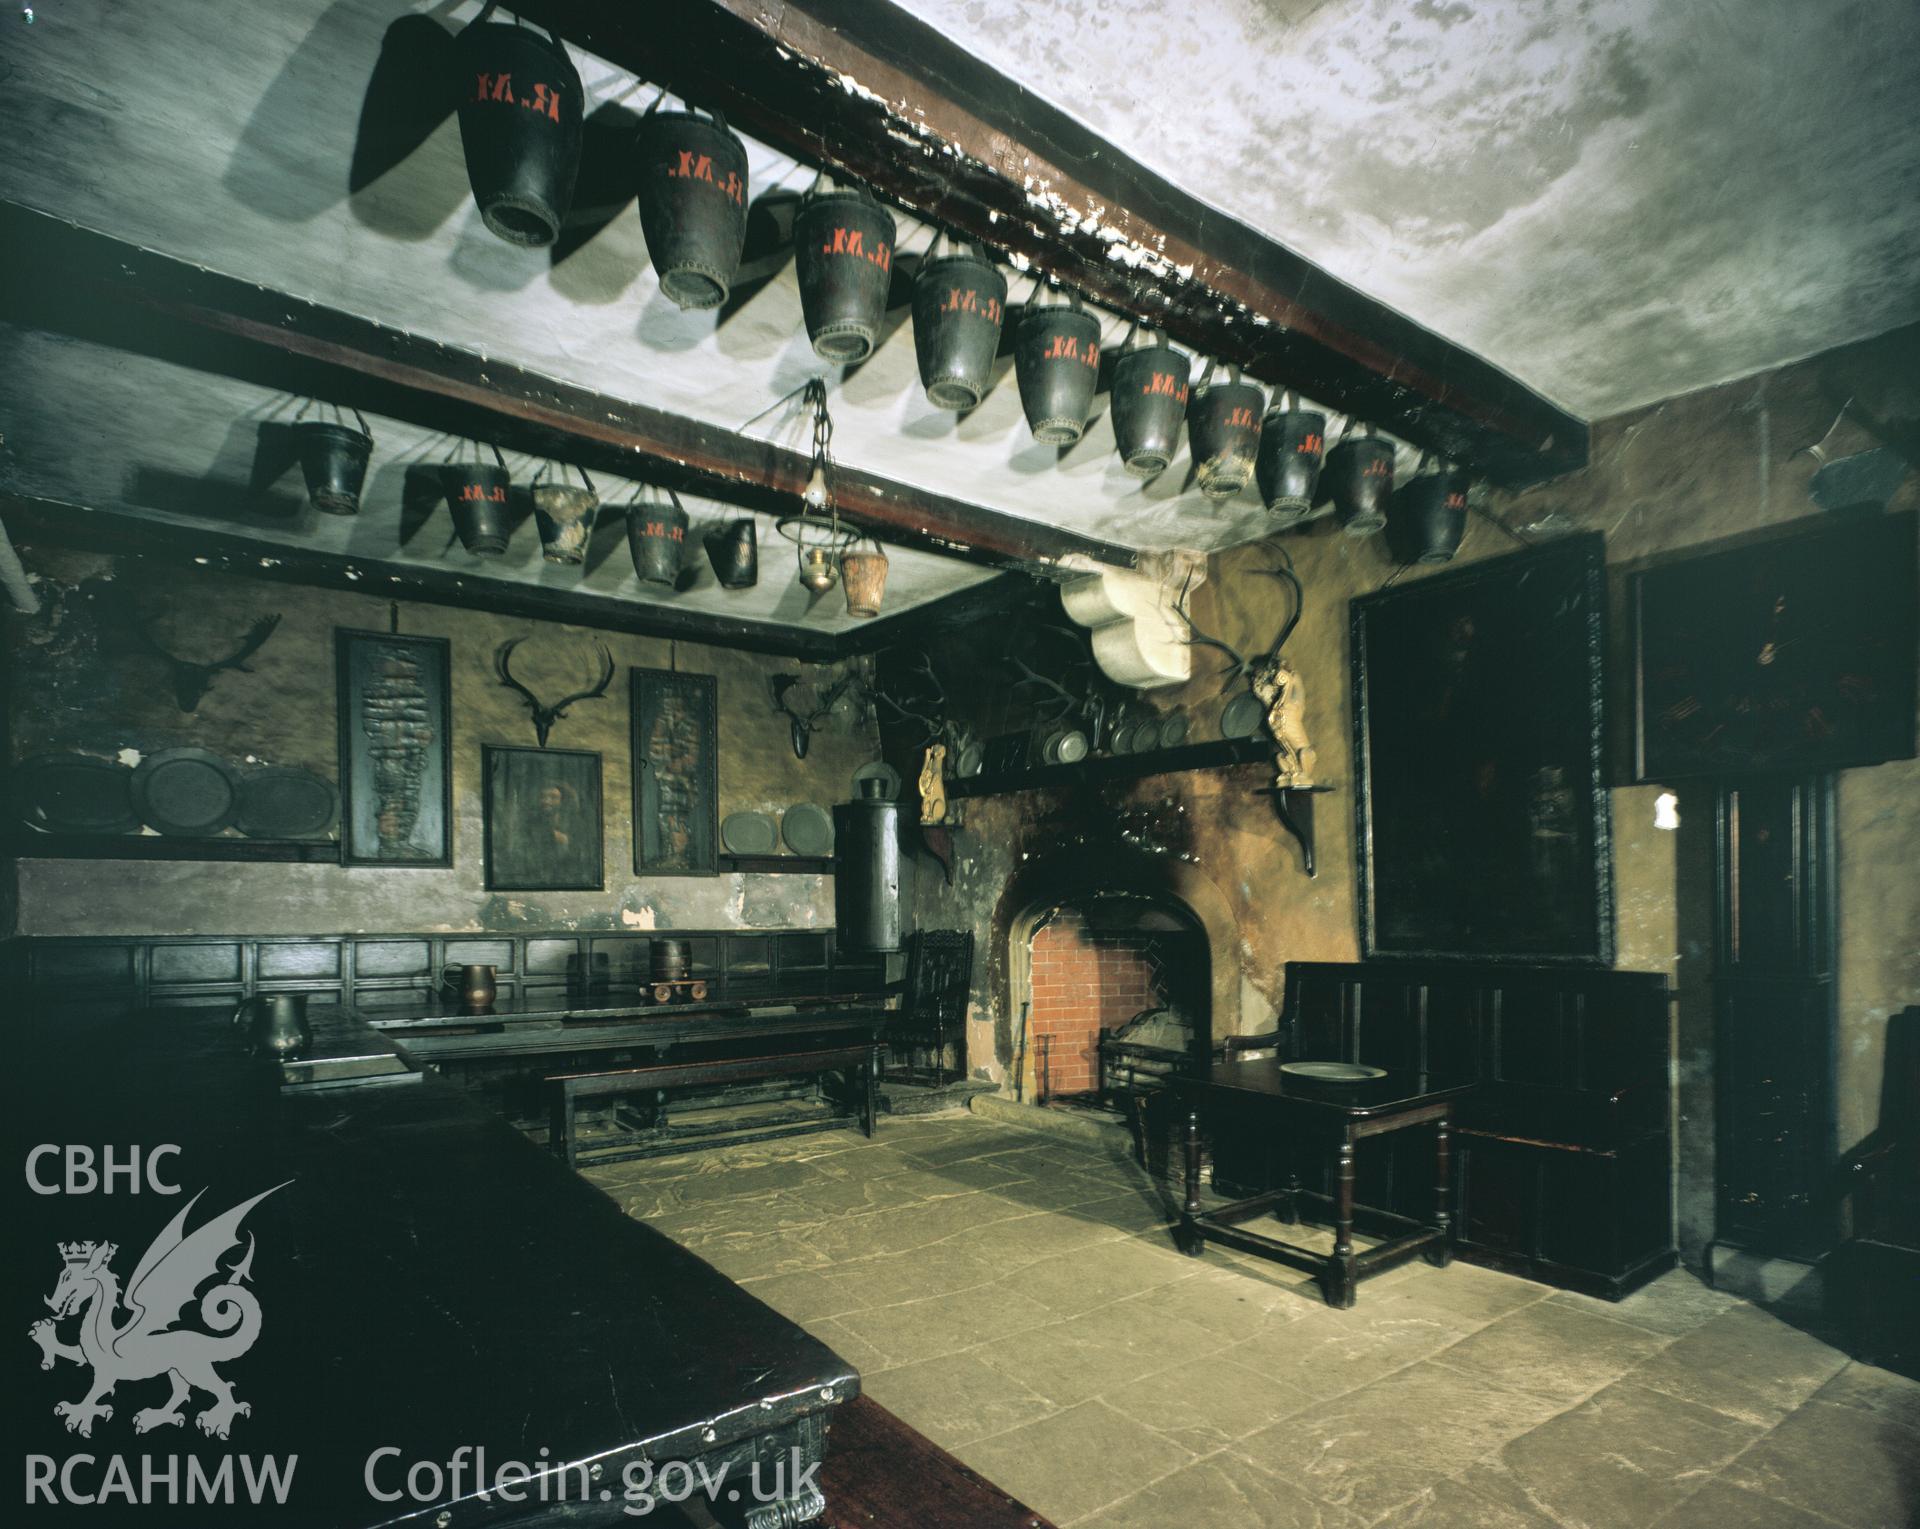 RCAHMW colour transparency showing the kitchen at Chirk Castle taken by I.N. Wright, 1979